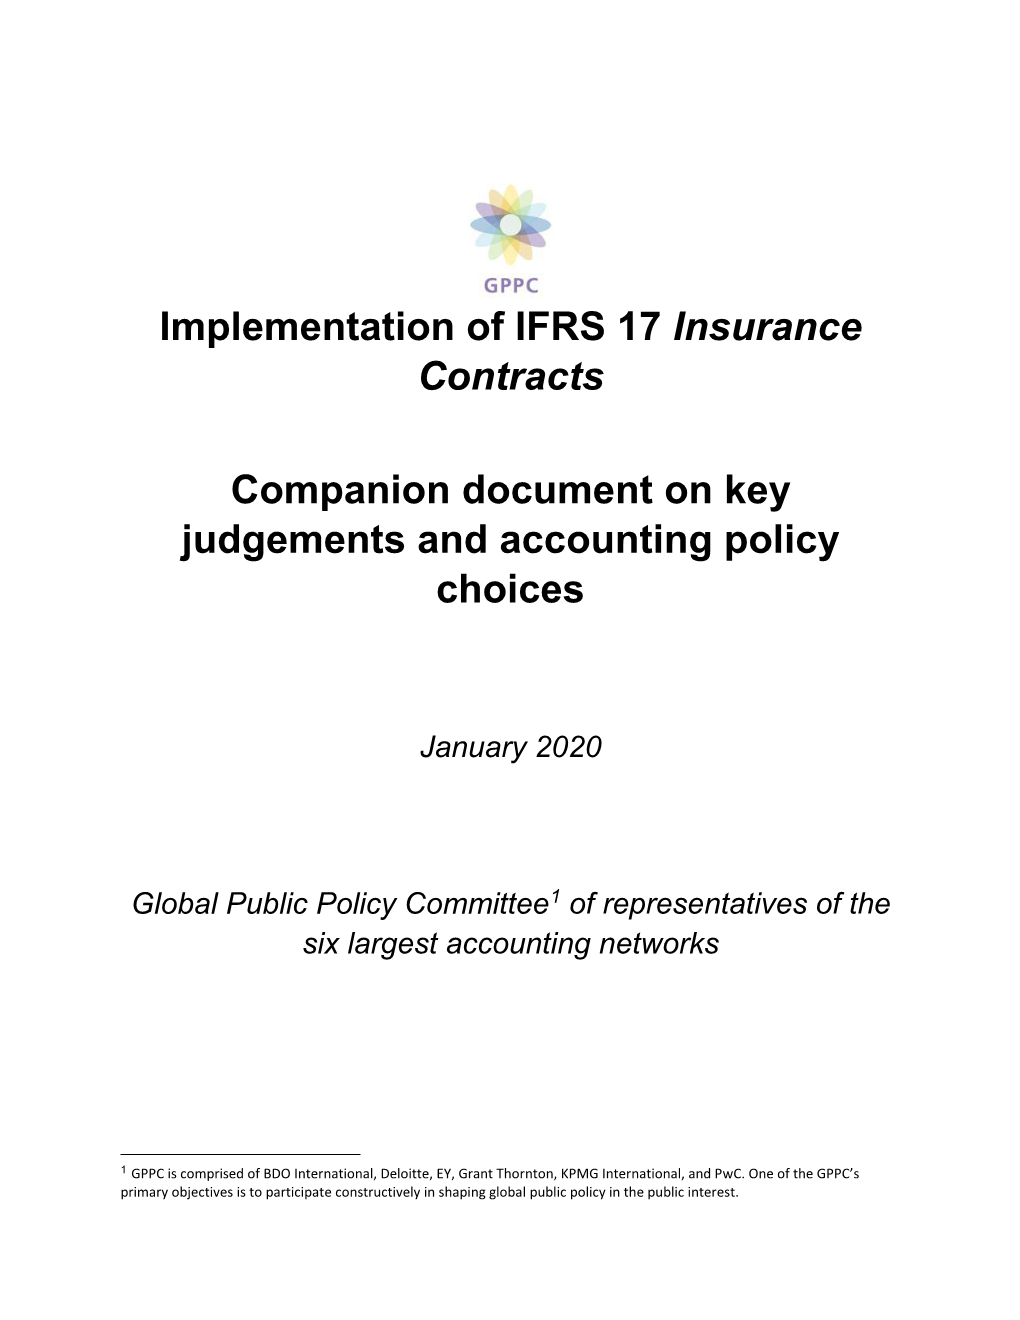 Implementation of IFRS 17 Insurance Contracts Companion Document On